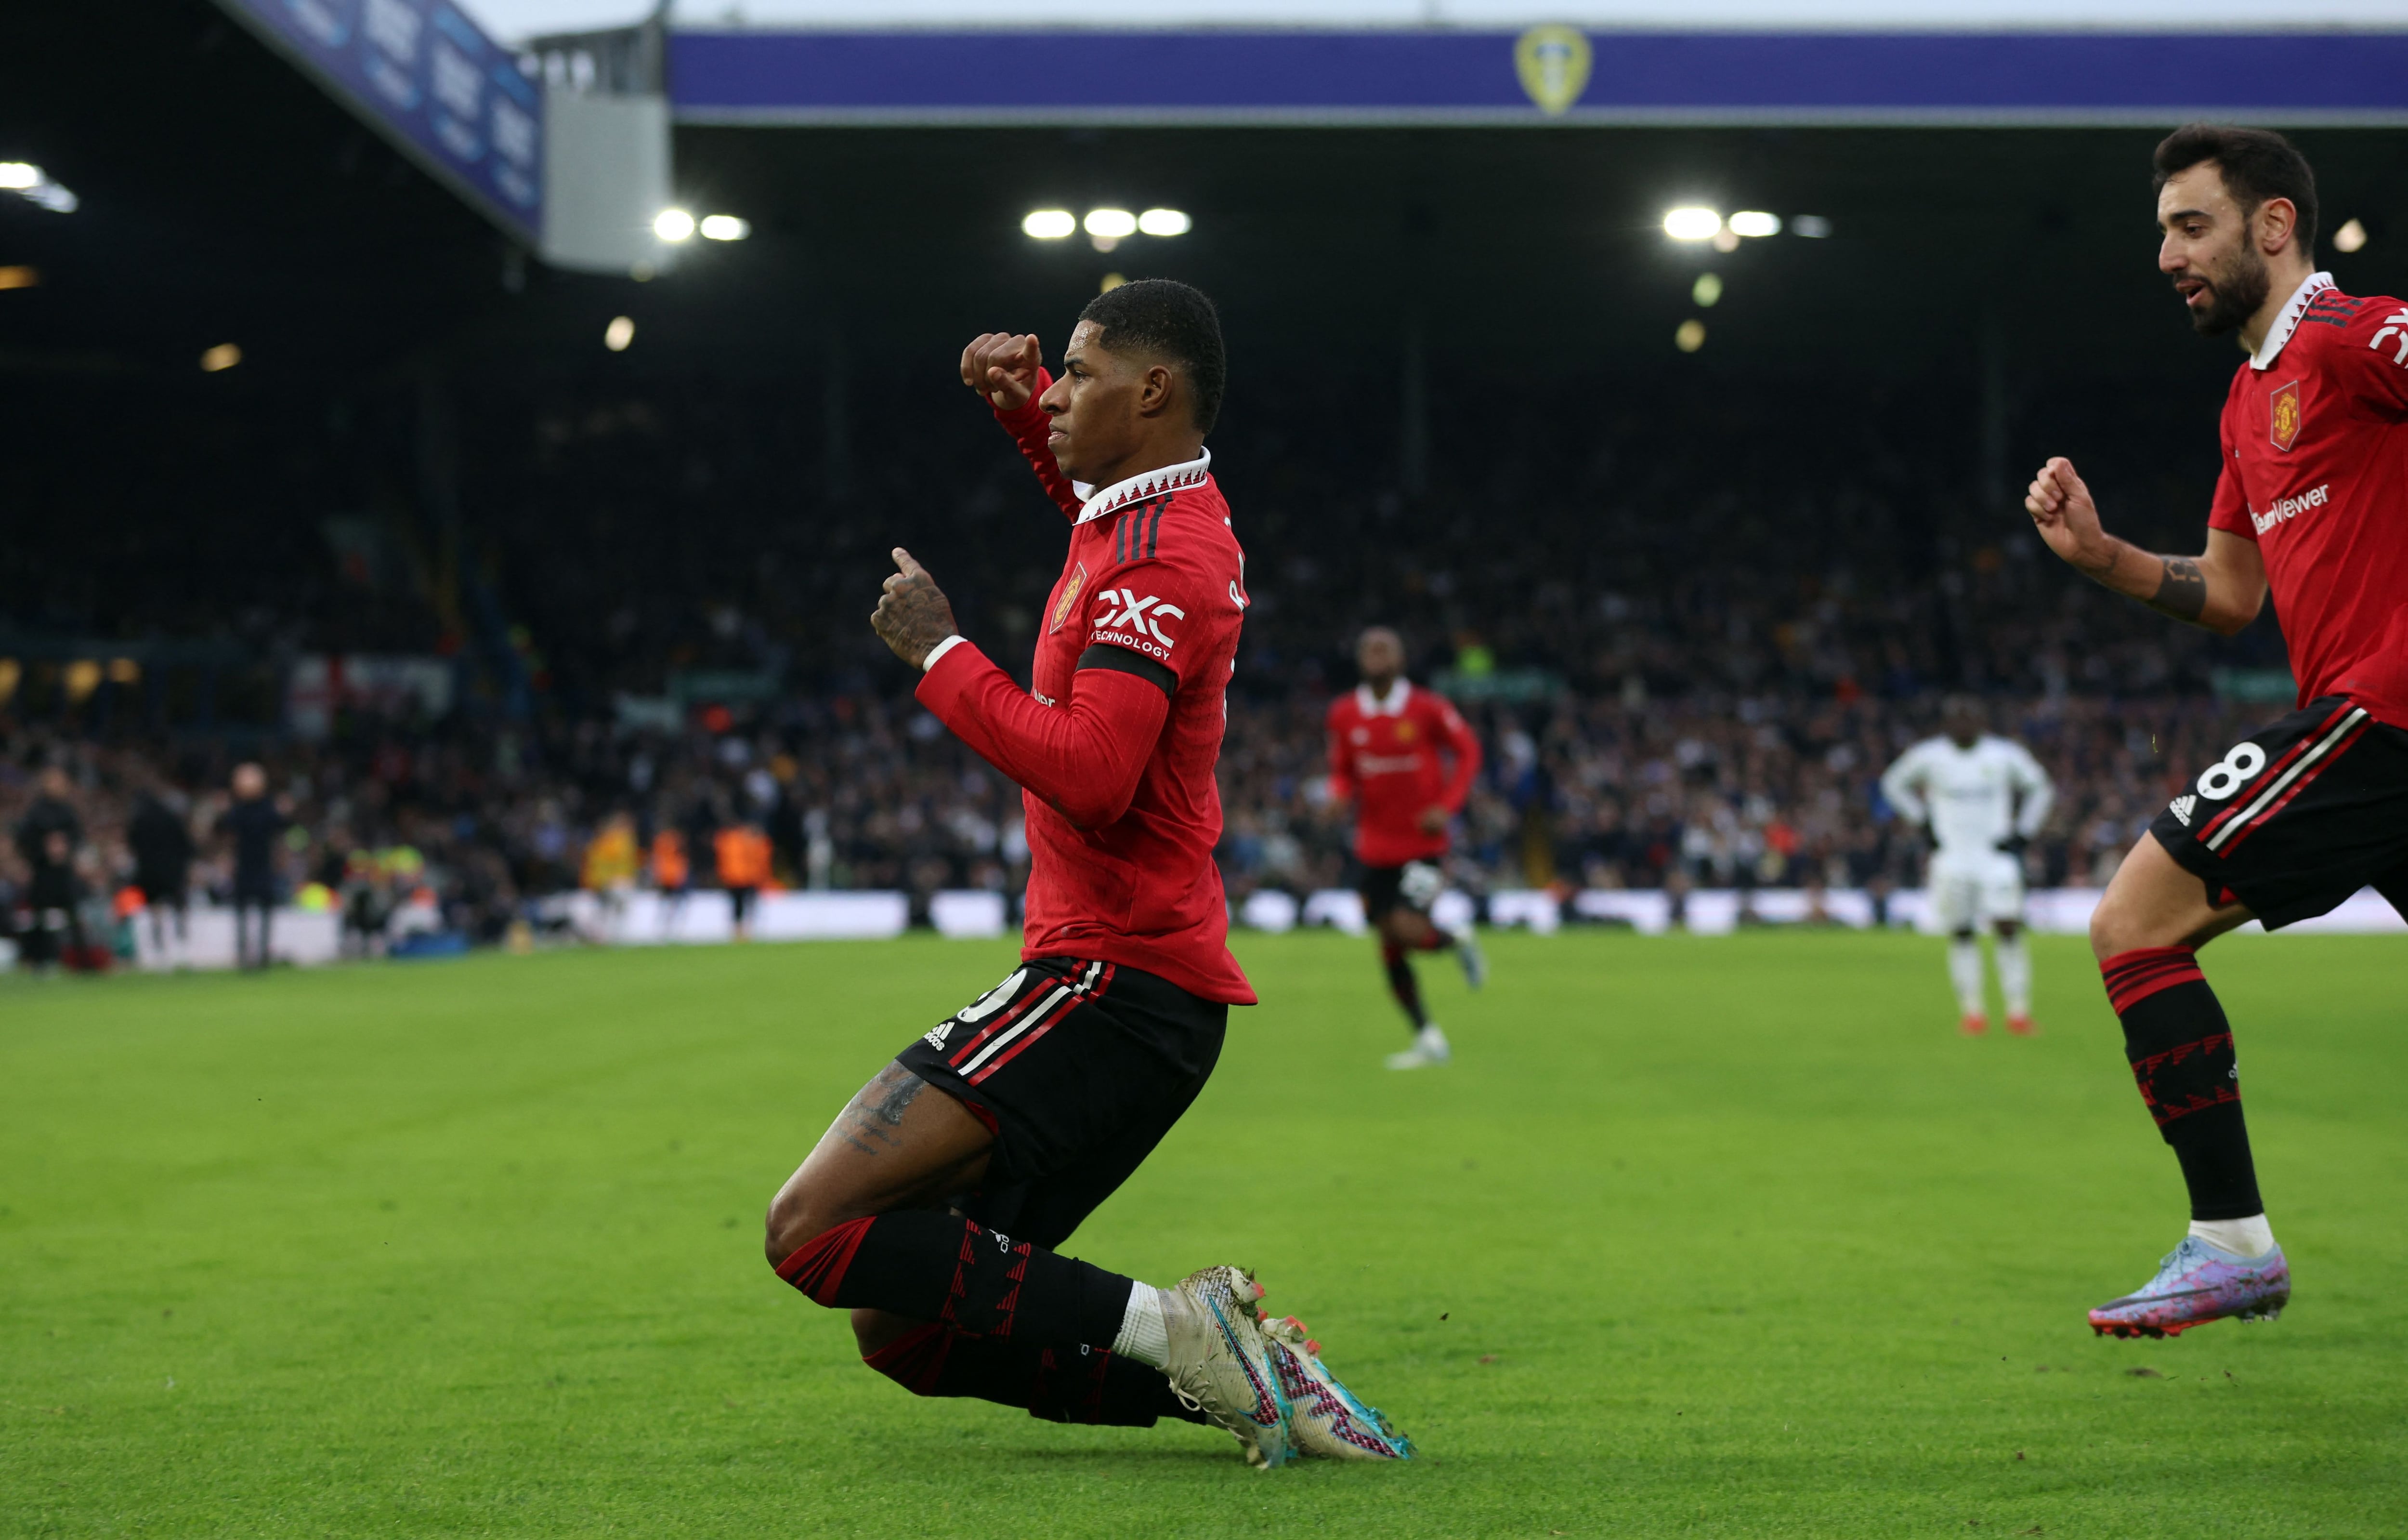 Soccer Football - Premier League - Leeds United v Manchester United - Elland Road, Leeds, Britain - February 12, 2023 Manchester United's Marcus Rashford celebrates scoring their first goal with Bruno Fernandes Action Images via Reuters/Lee Smith EDITORIAL USE ONLY. No use with unauthorized audio, video, data, fixture lists, club/league logos or 'live' services. Online in-match use limited to 75 images, no video emulation. No use in betting, games or single club /league/player publications.  Please contact your account representative for further details.